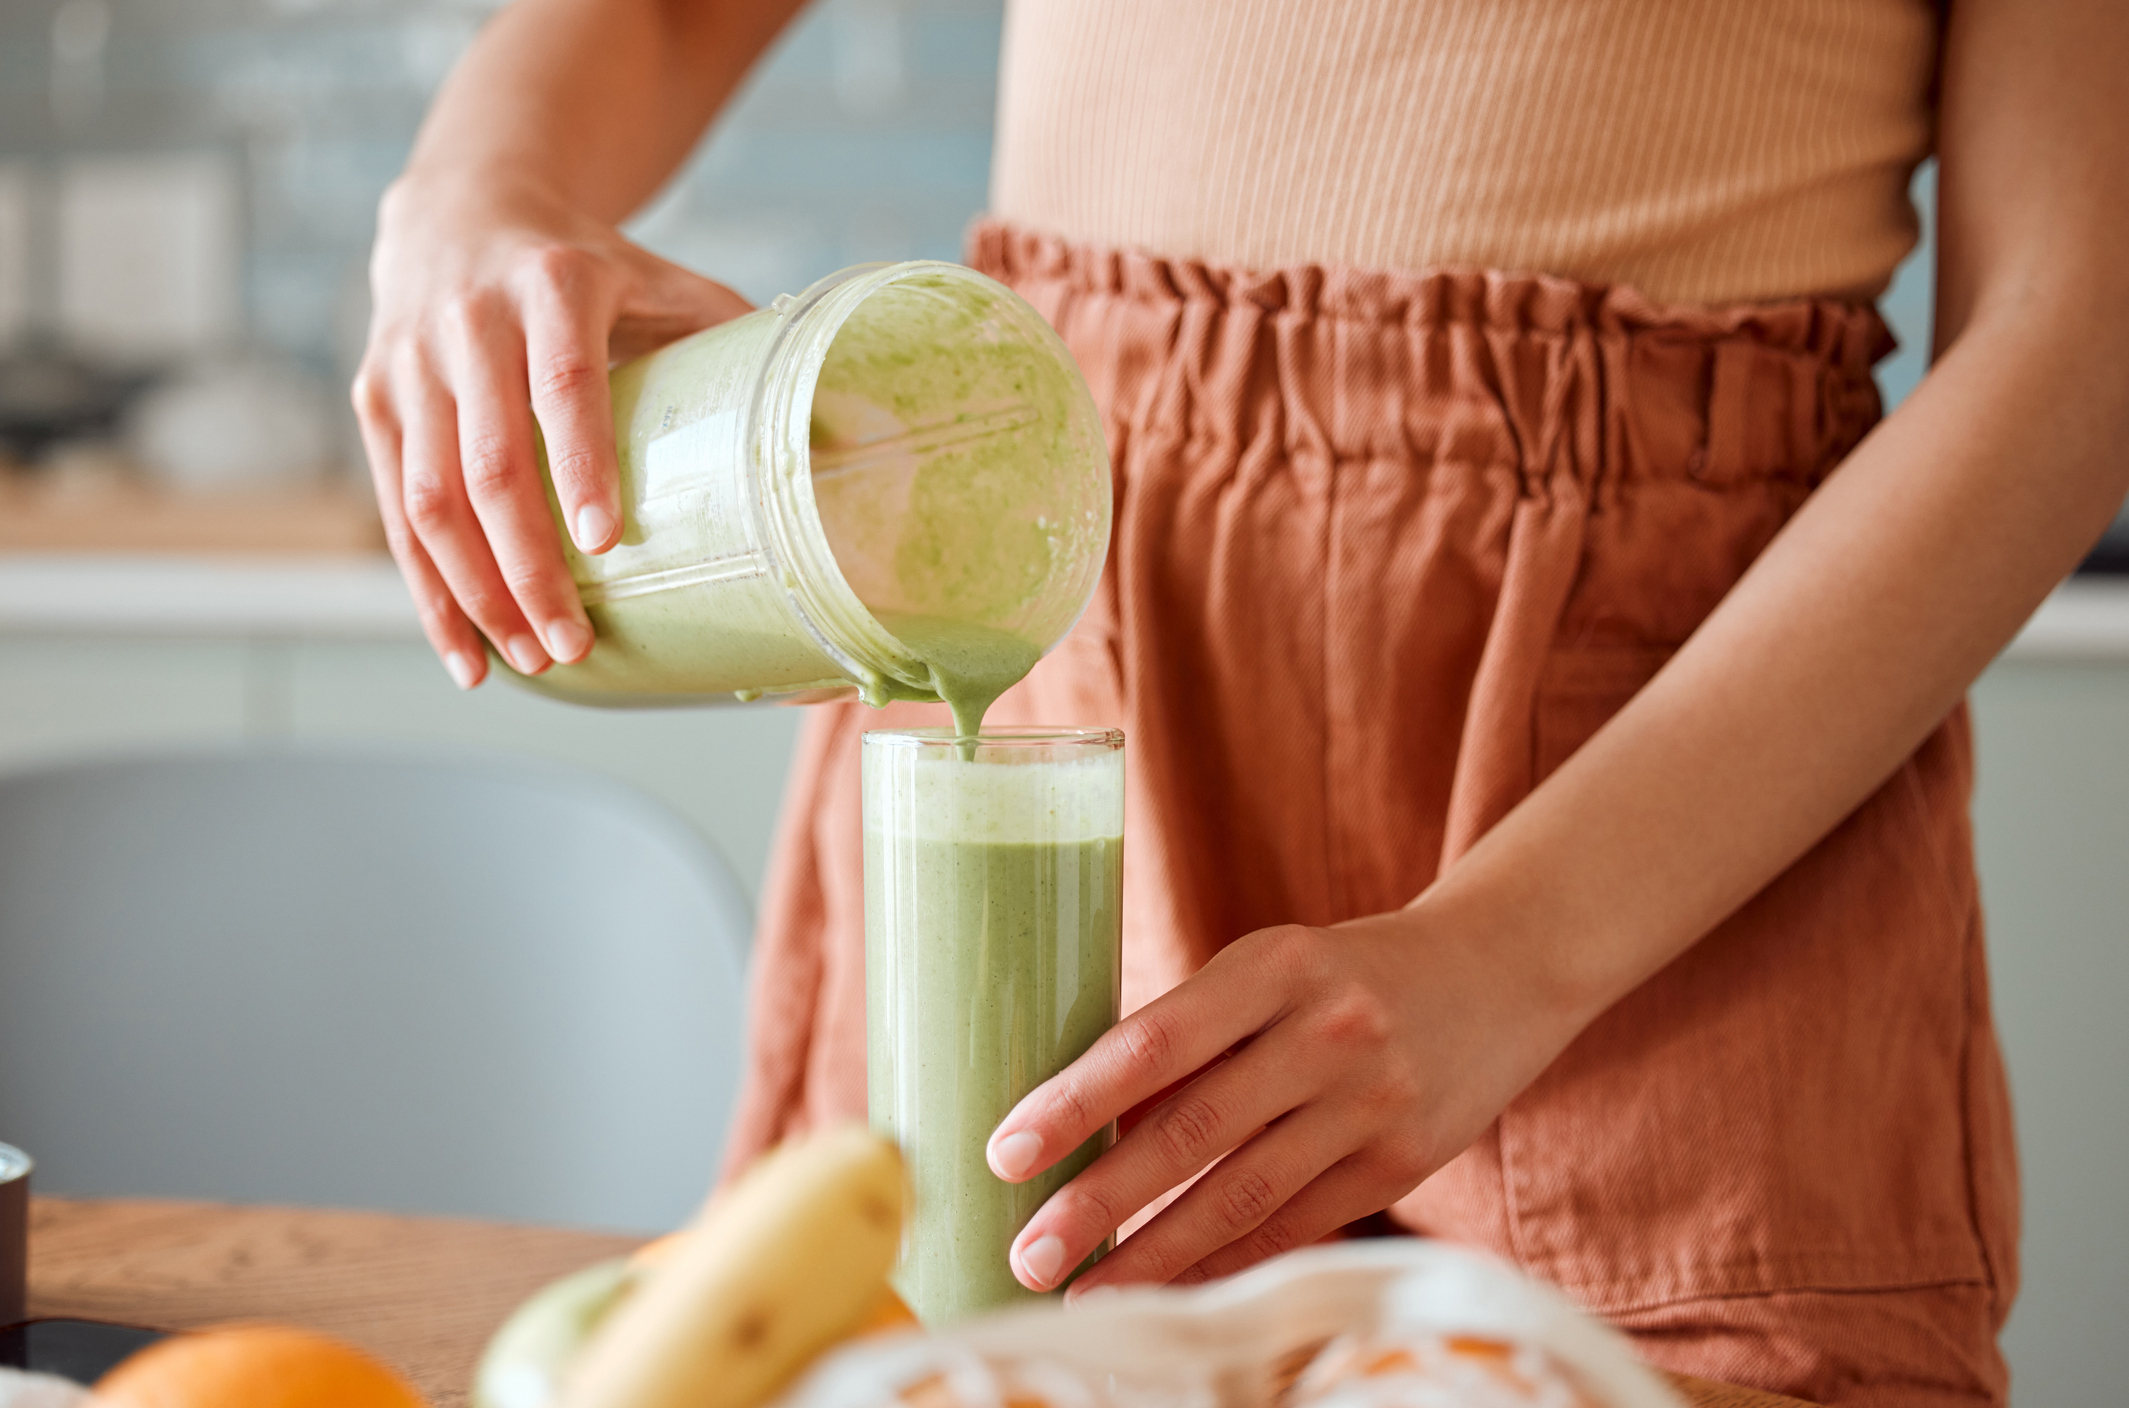 Woman pouring healthy smoothie in a glass from a blender jar on a counter for detox. Female making fresh green fruit juice in her kitchen with vegetables and consumables for a fit lifestyle. stock image